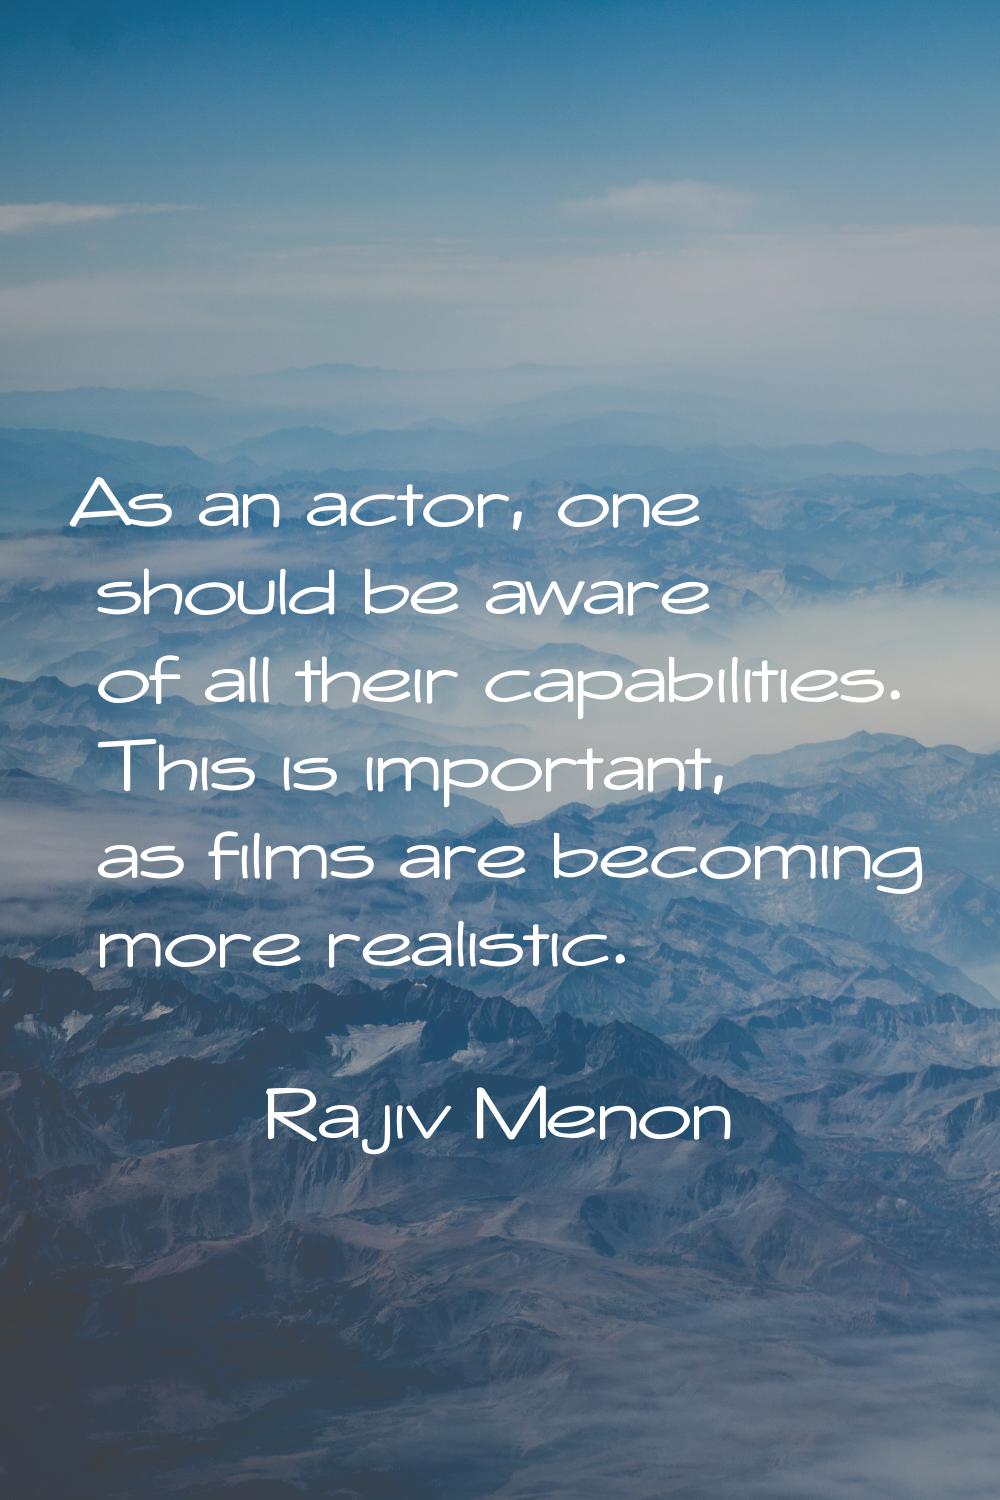 As an actor, one should be aware of all their capabilities. This is important, as films are becomin